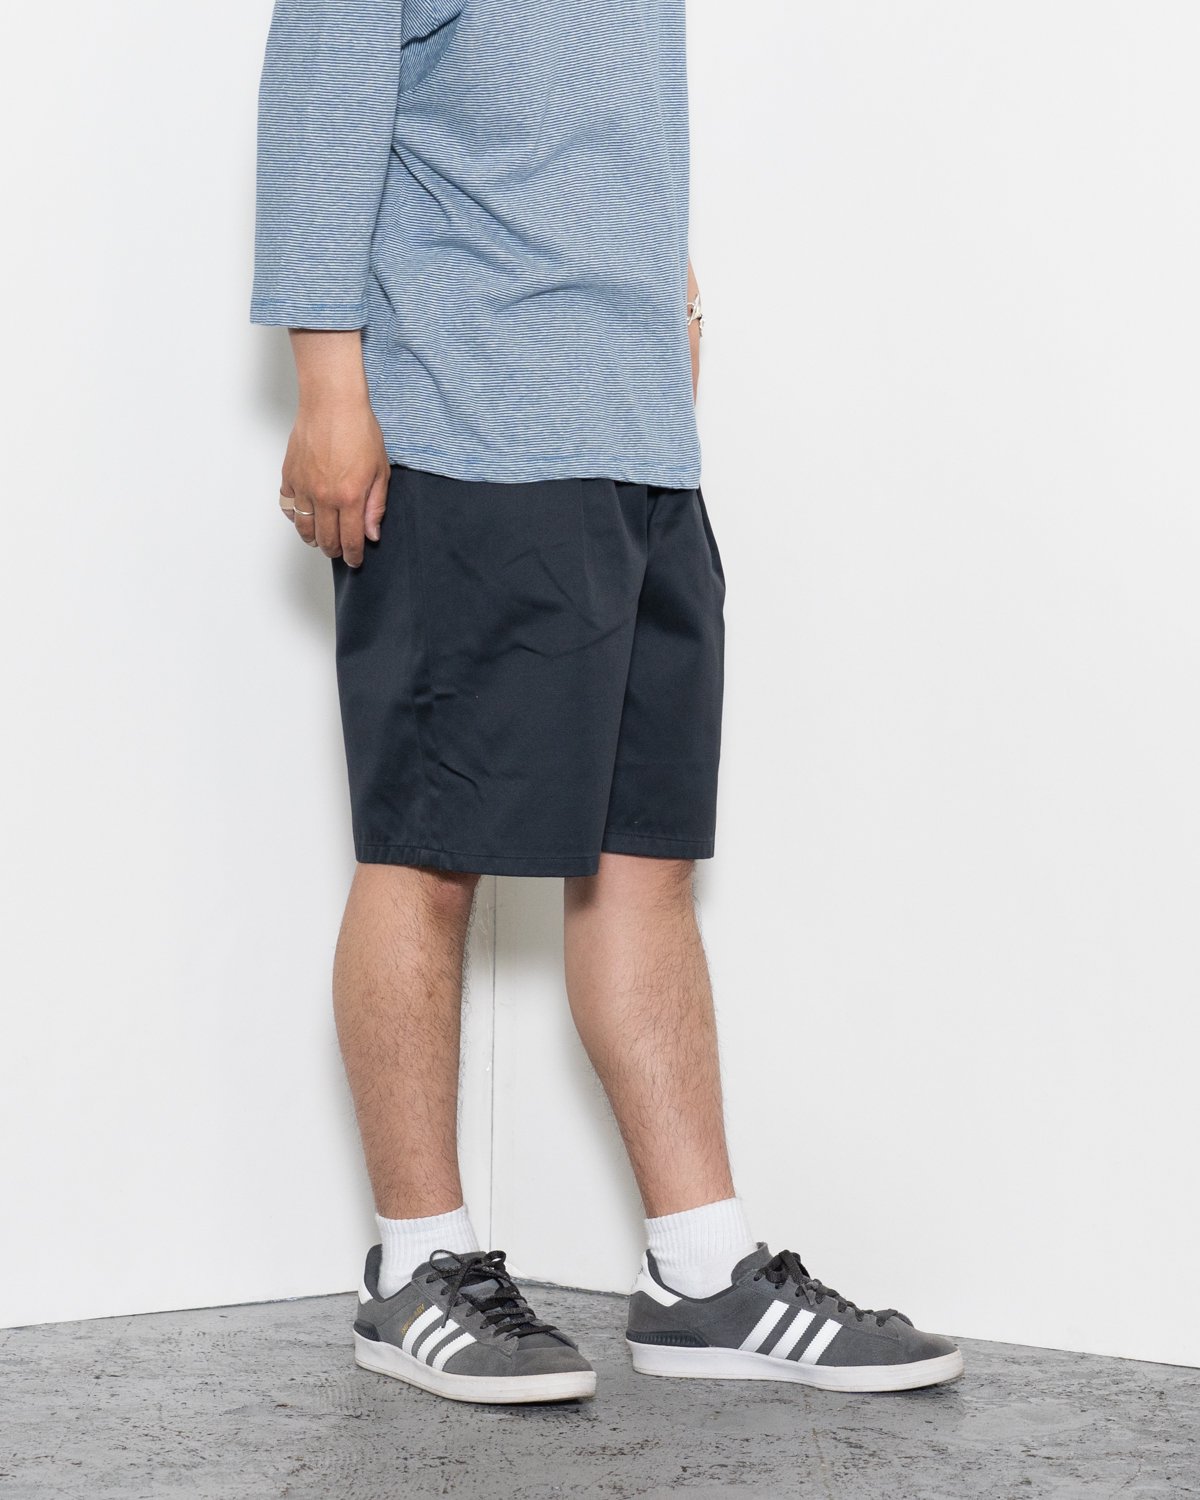 FARAH * M4026 Two-Tuck Wide Shorts West Point(2色展開)